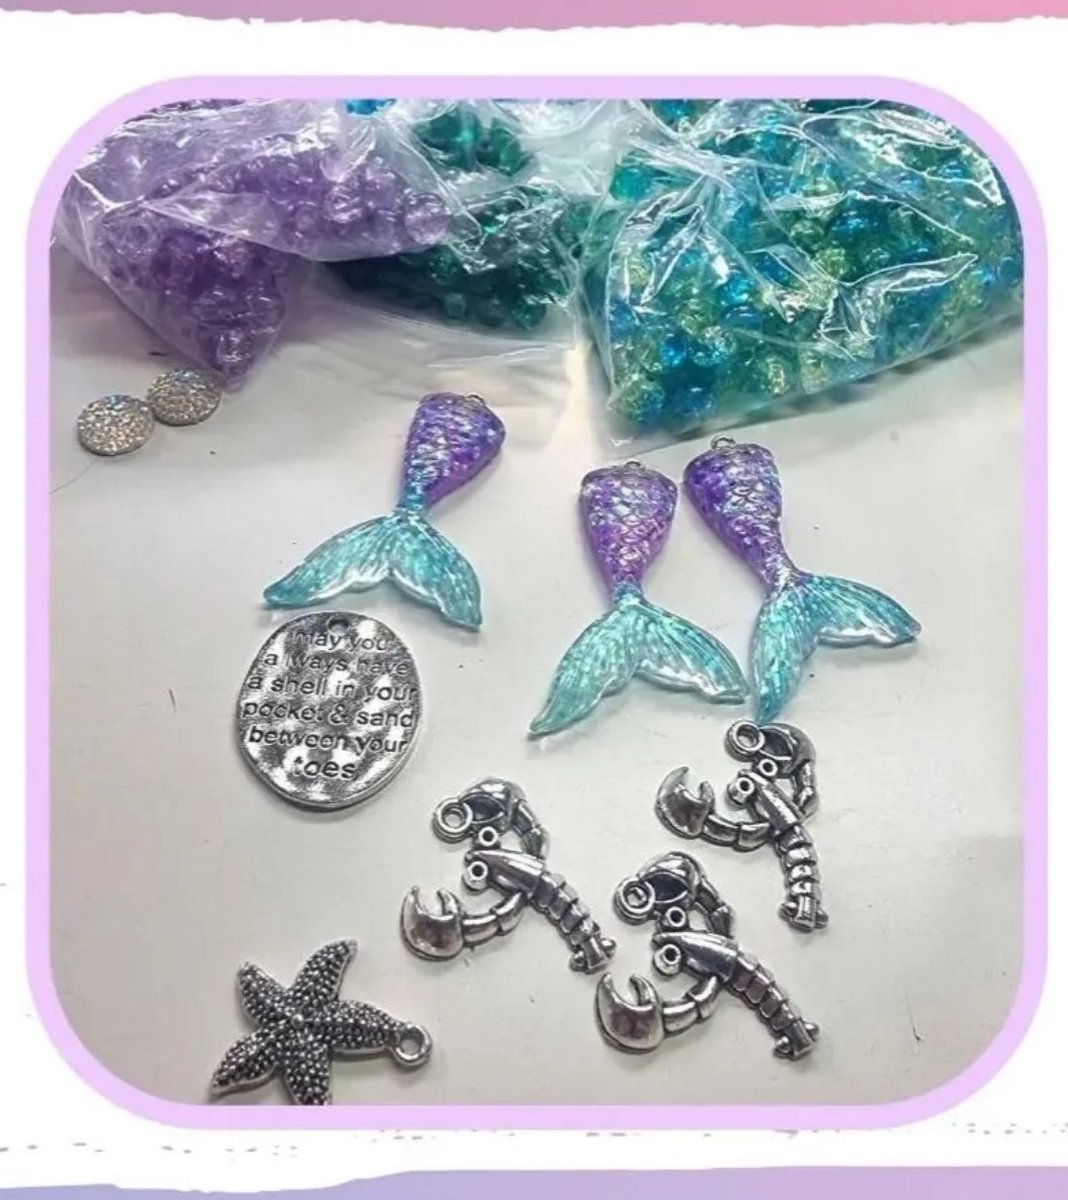 Today, I'm planning on making another New jewellery collection....
can you guess the theme of this one?? ♡♡♡
#craftyjuju
#craftyjujudesigns #newjewellery
#newjewelry
#mermaid #mermaidjewelry #etsyukshop #supportsmallbusiness #derbyshirebusiness #chesterfieldbusiness